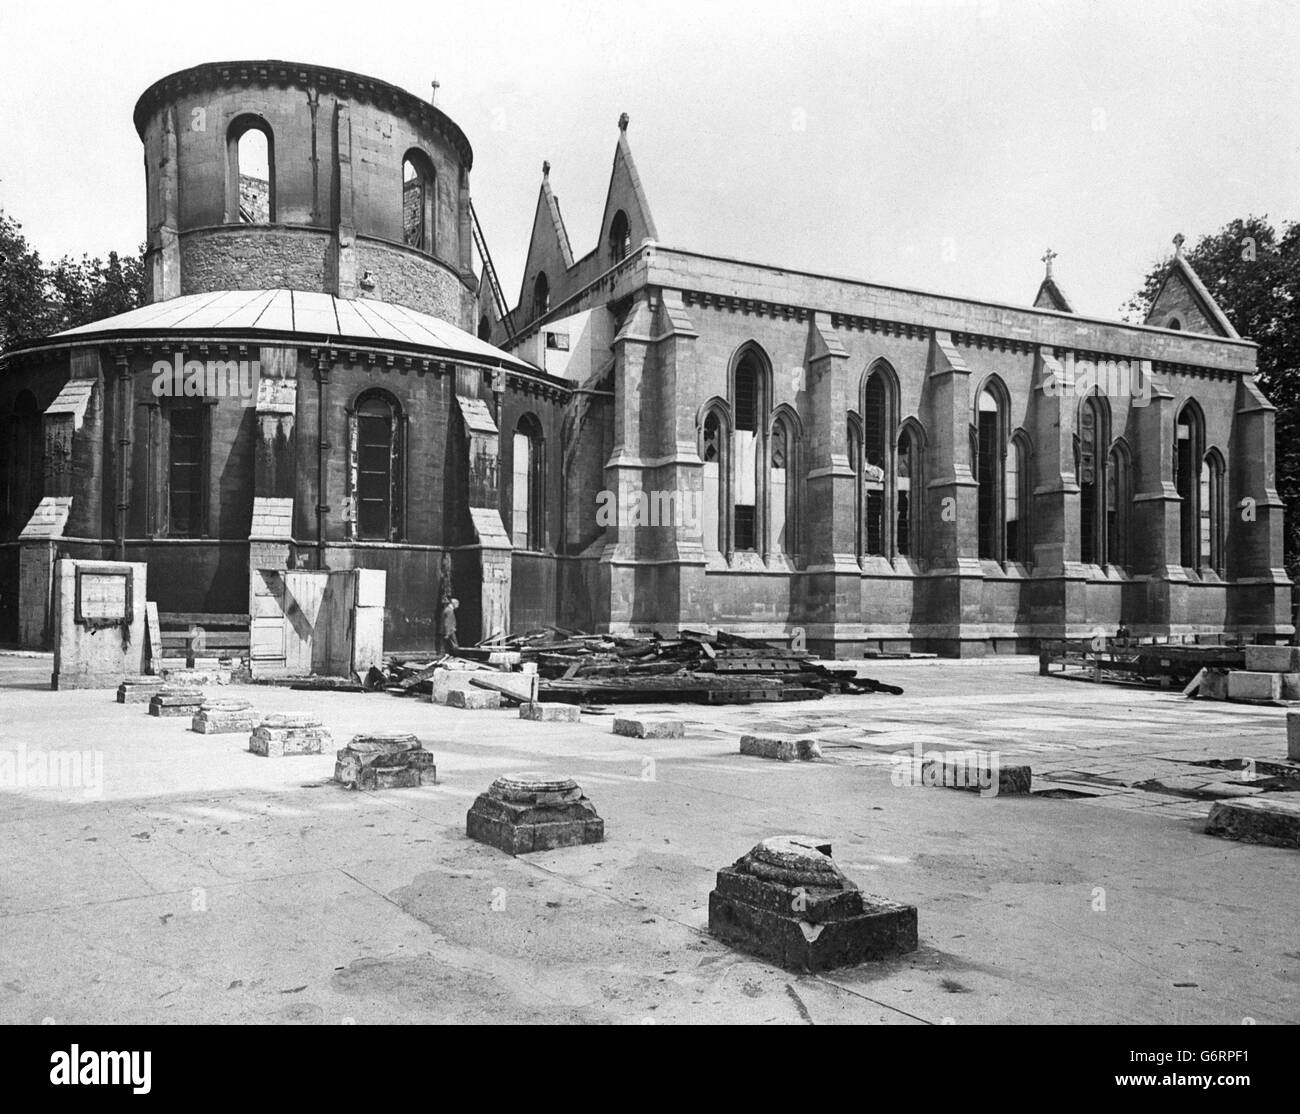 The exterior of Temple Church in London after the surrounding bombed damaged buildings had been cleaned up by demolition workers. Stock Photo